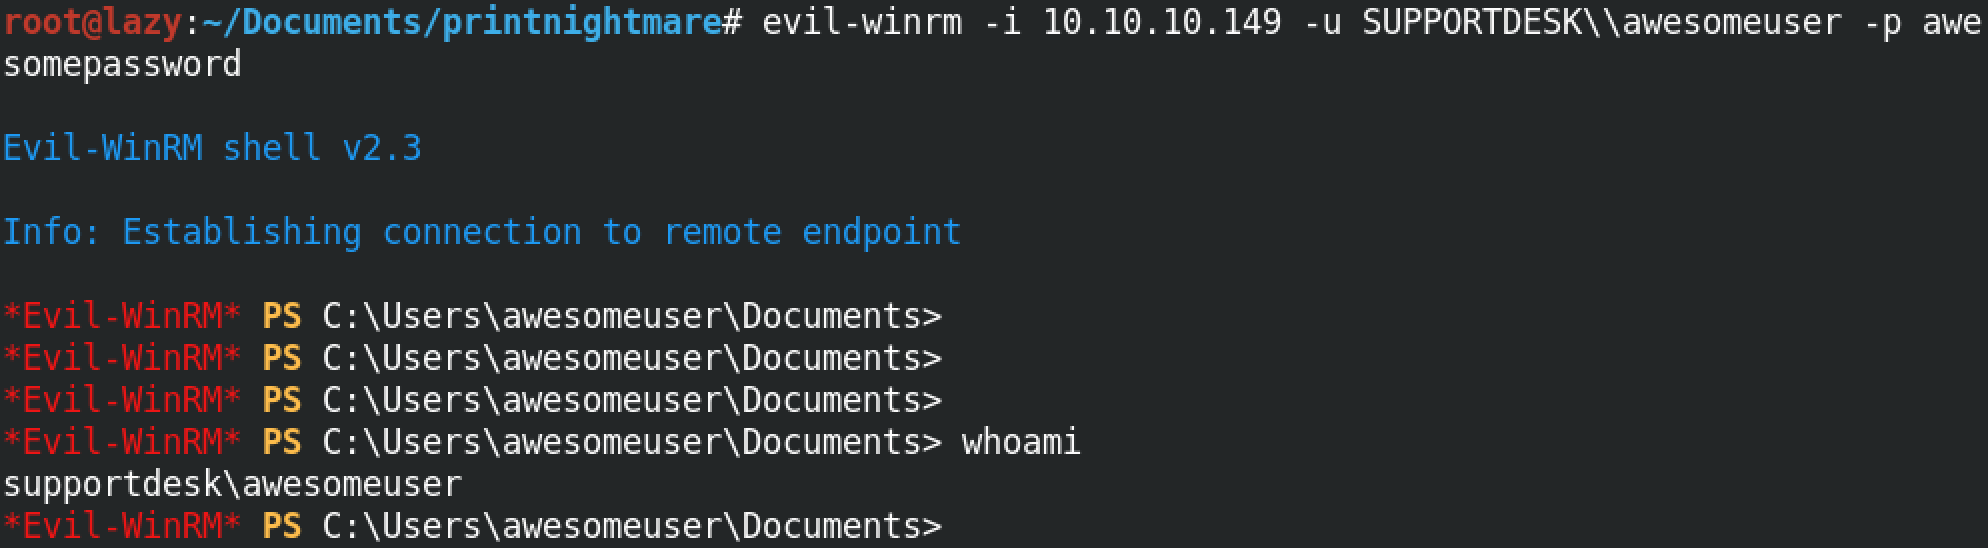 Login to the box with evil-winrm.